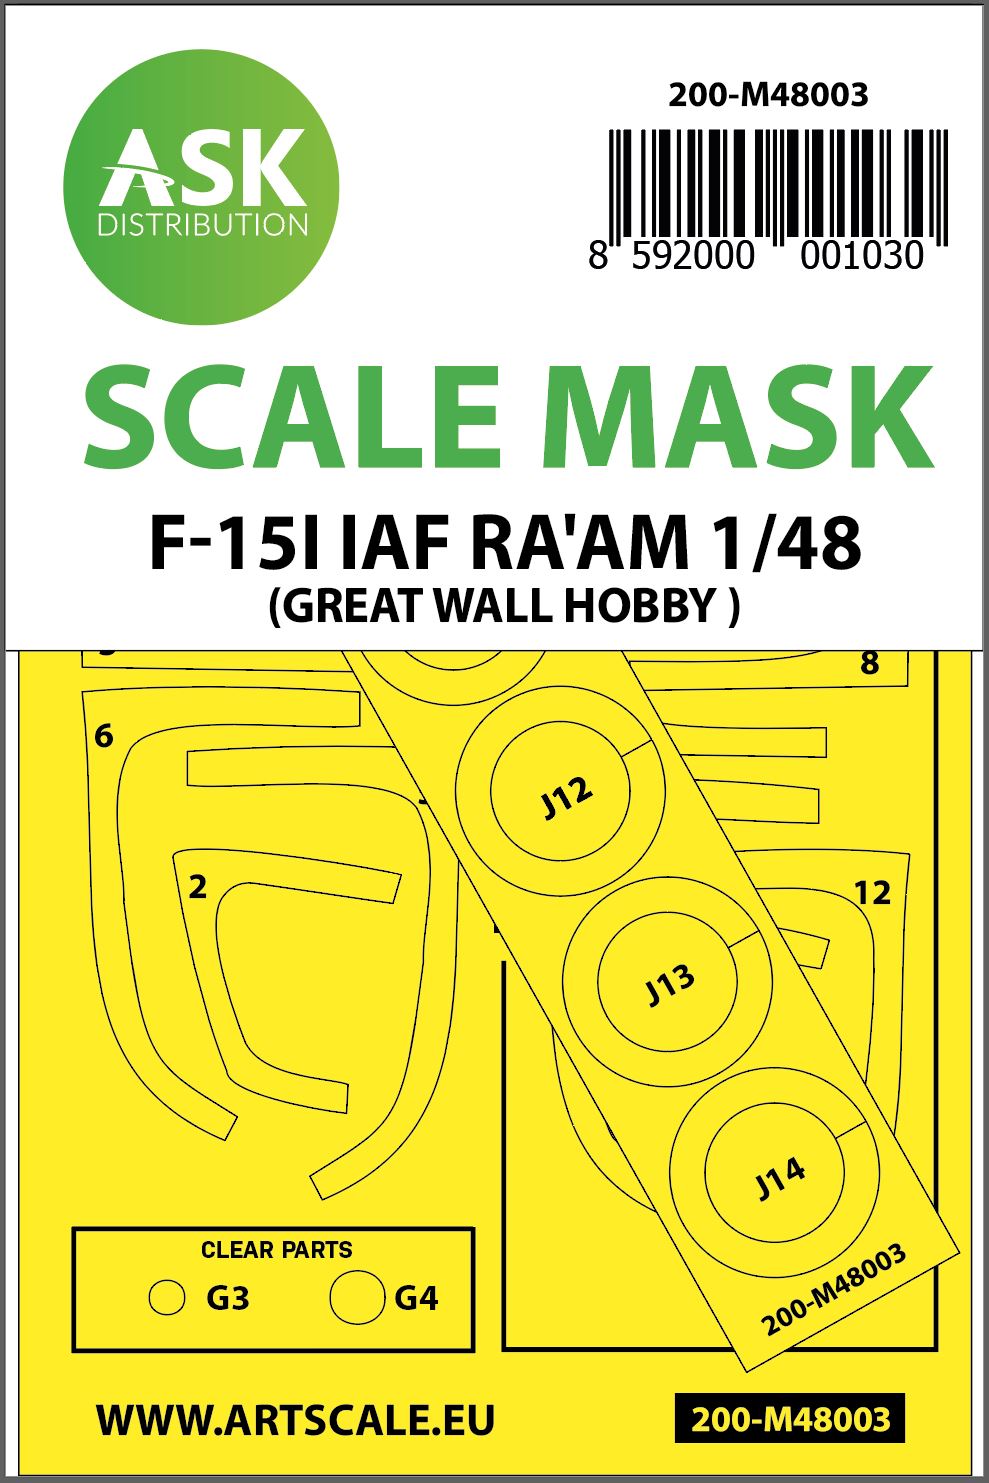 1/48 F-15I Ra'am mask for Great Wall Hobby